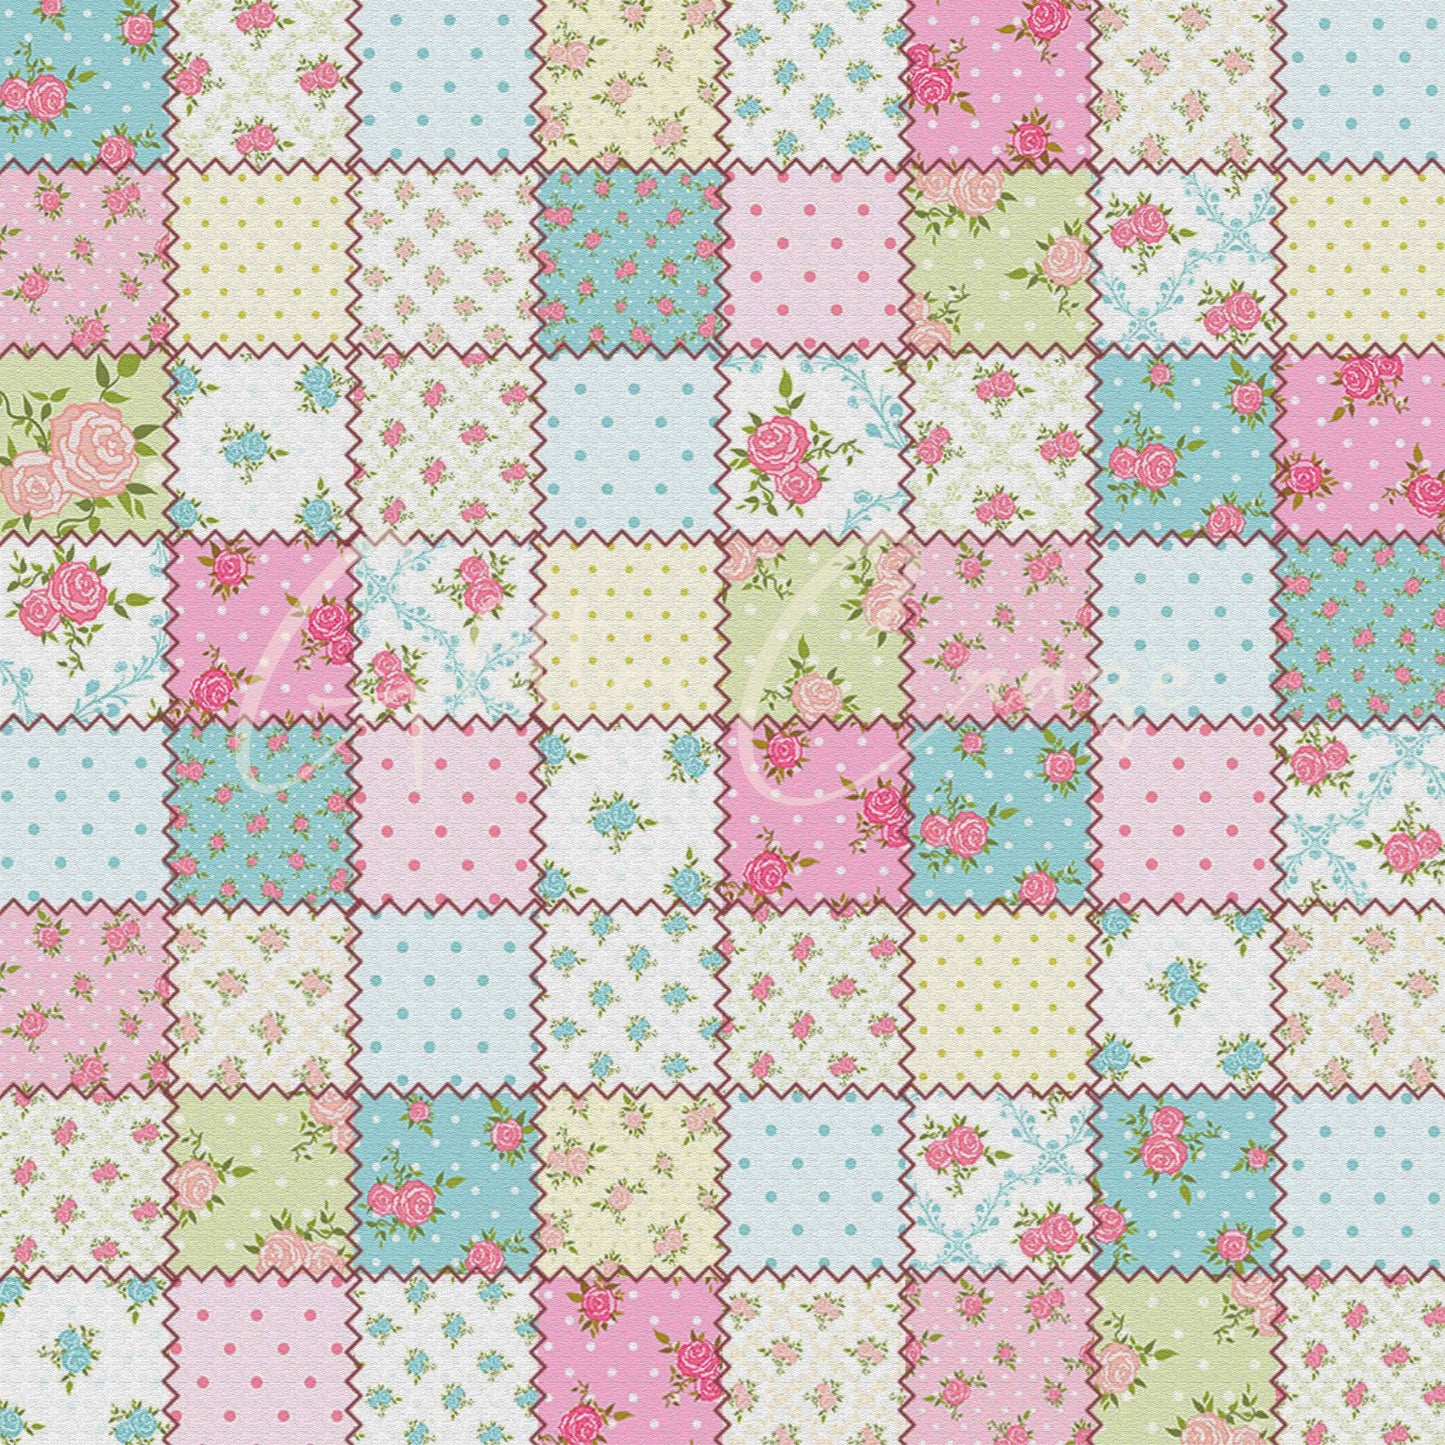 Patchwork Collection 12x12 Vinyl Sheets- 12 Patterns Available